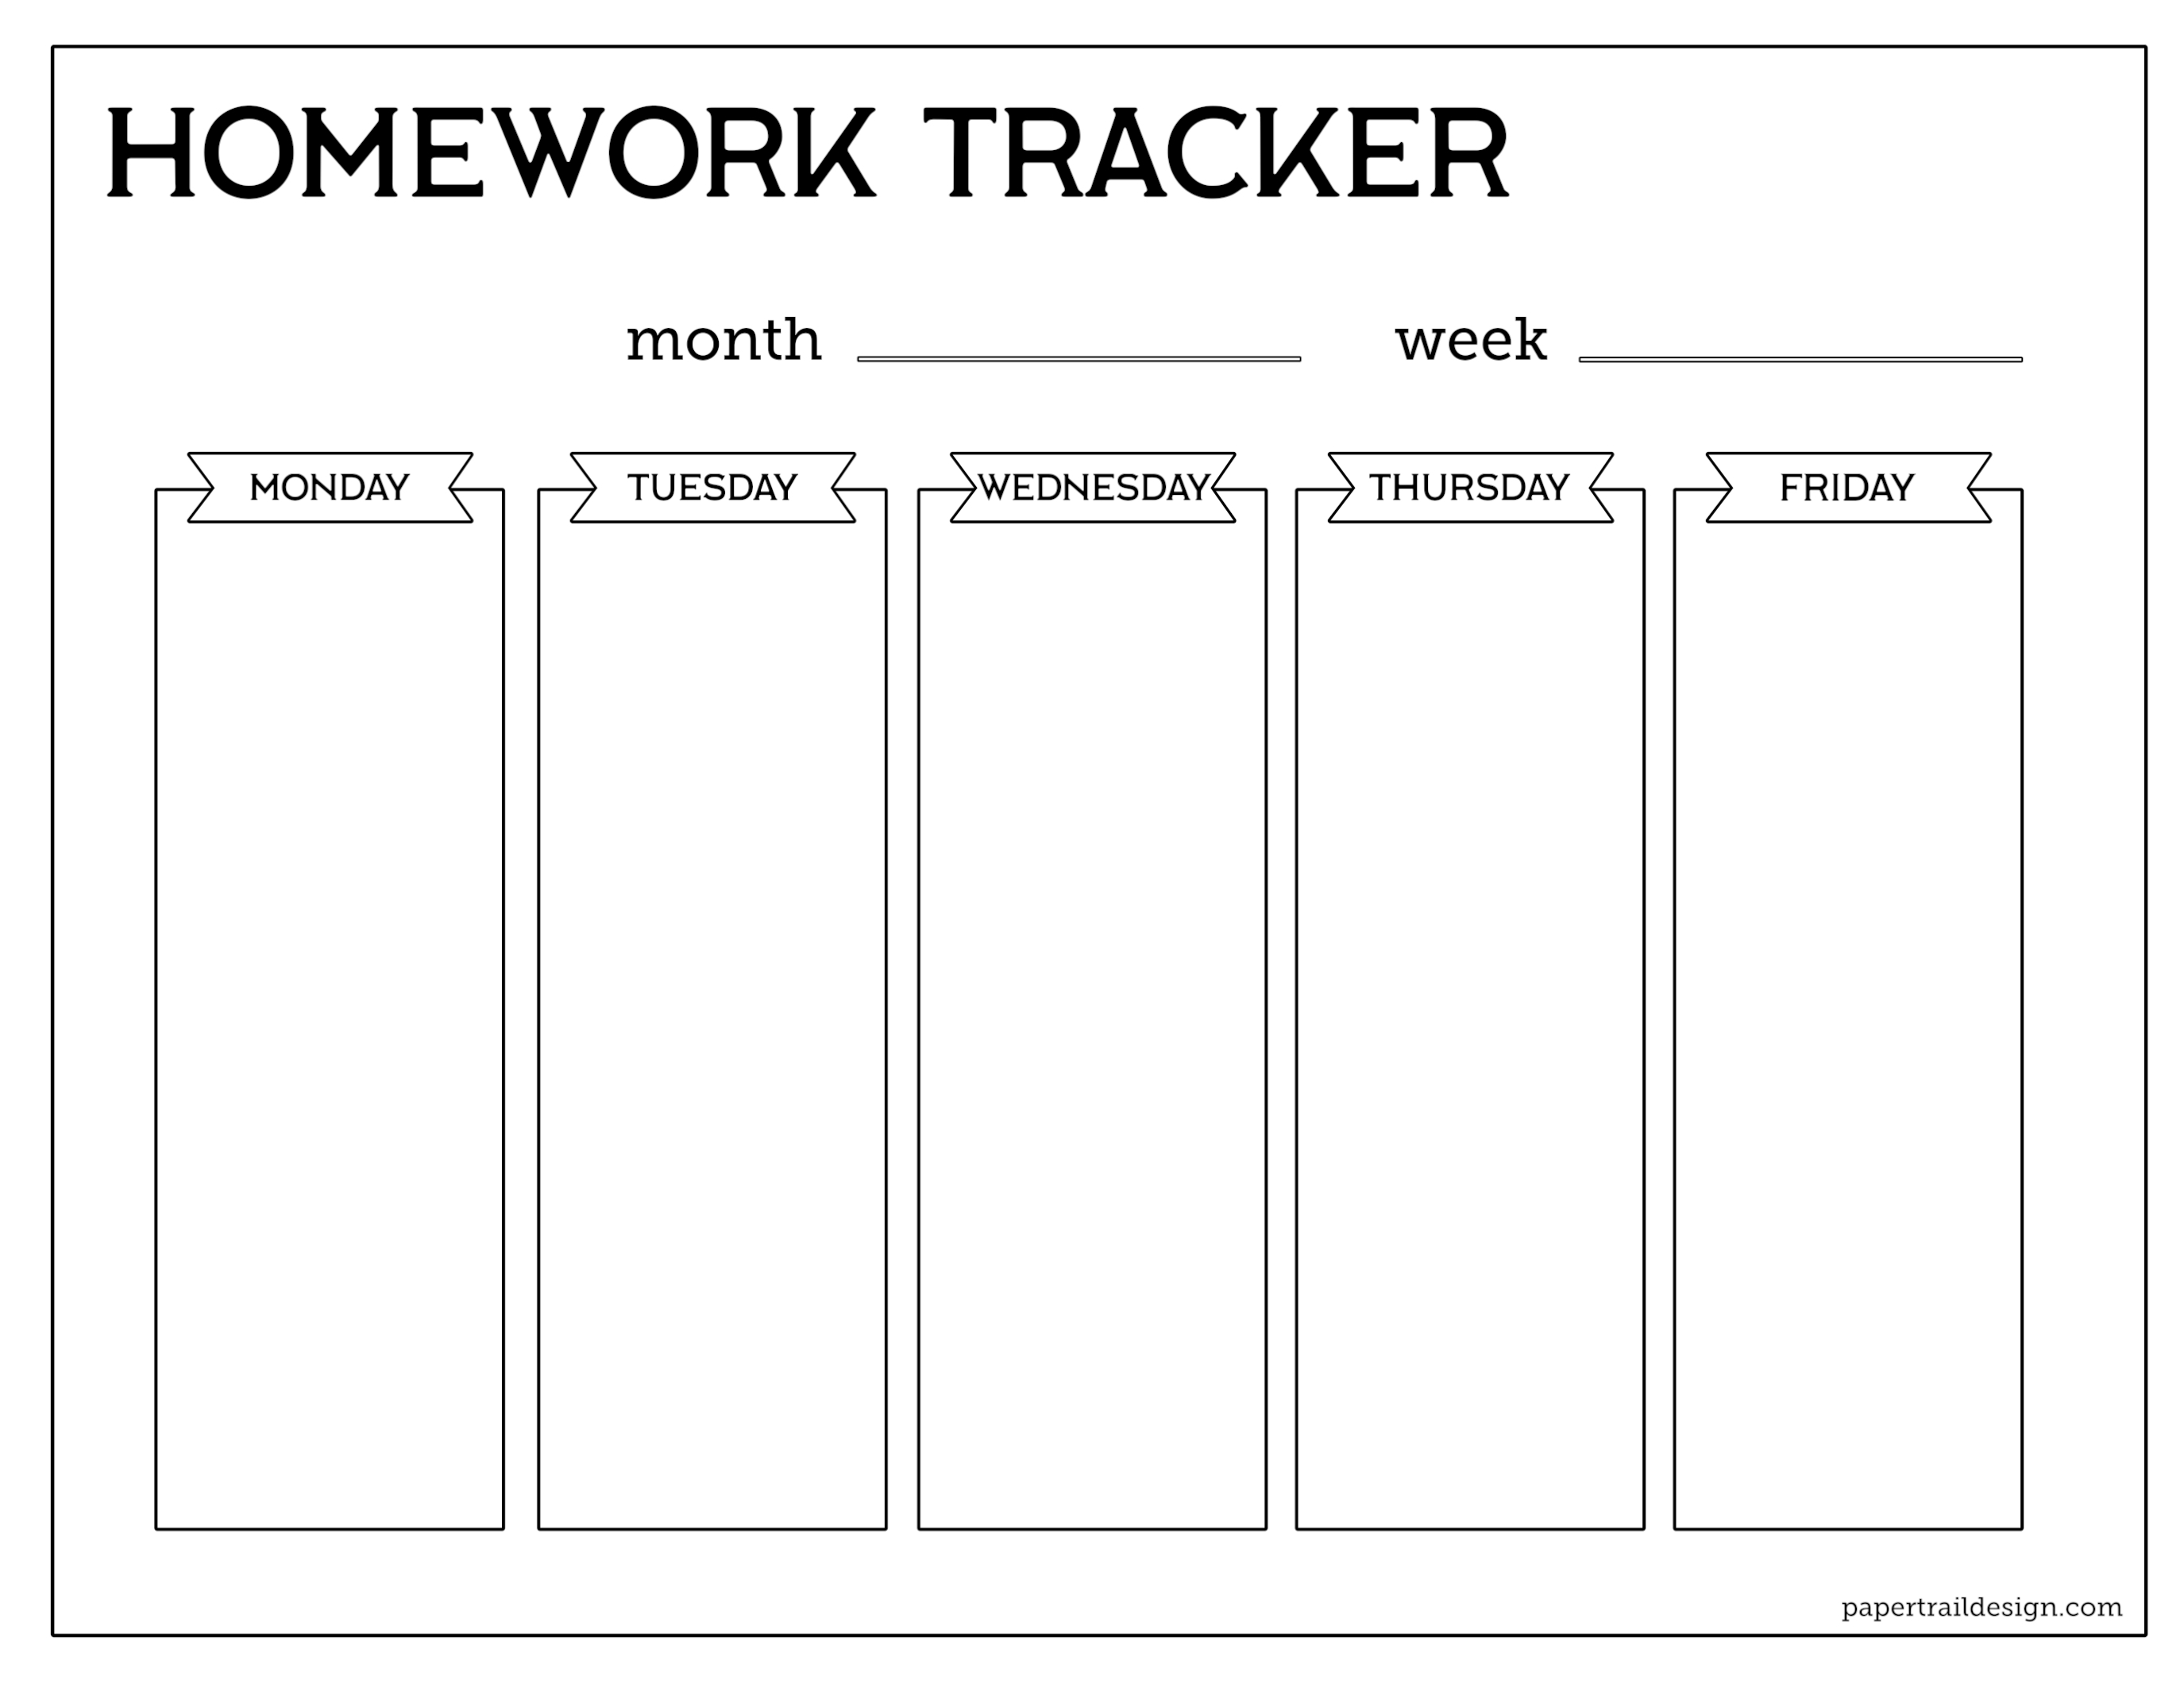 Student Assignment Homework Planner Printable - Taste of the Frontier